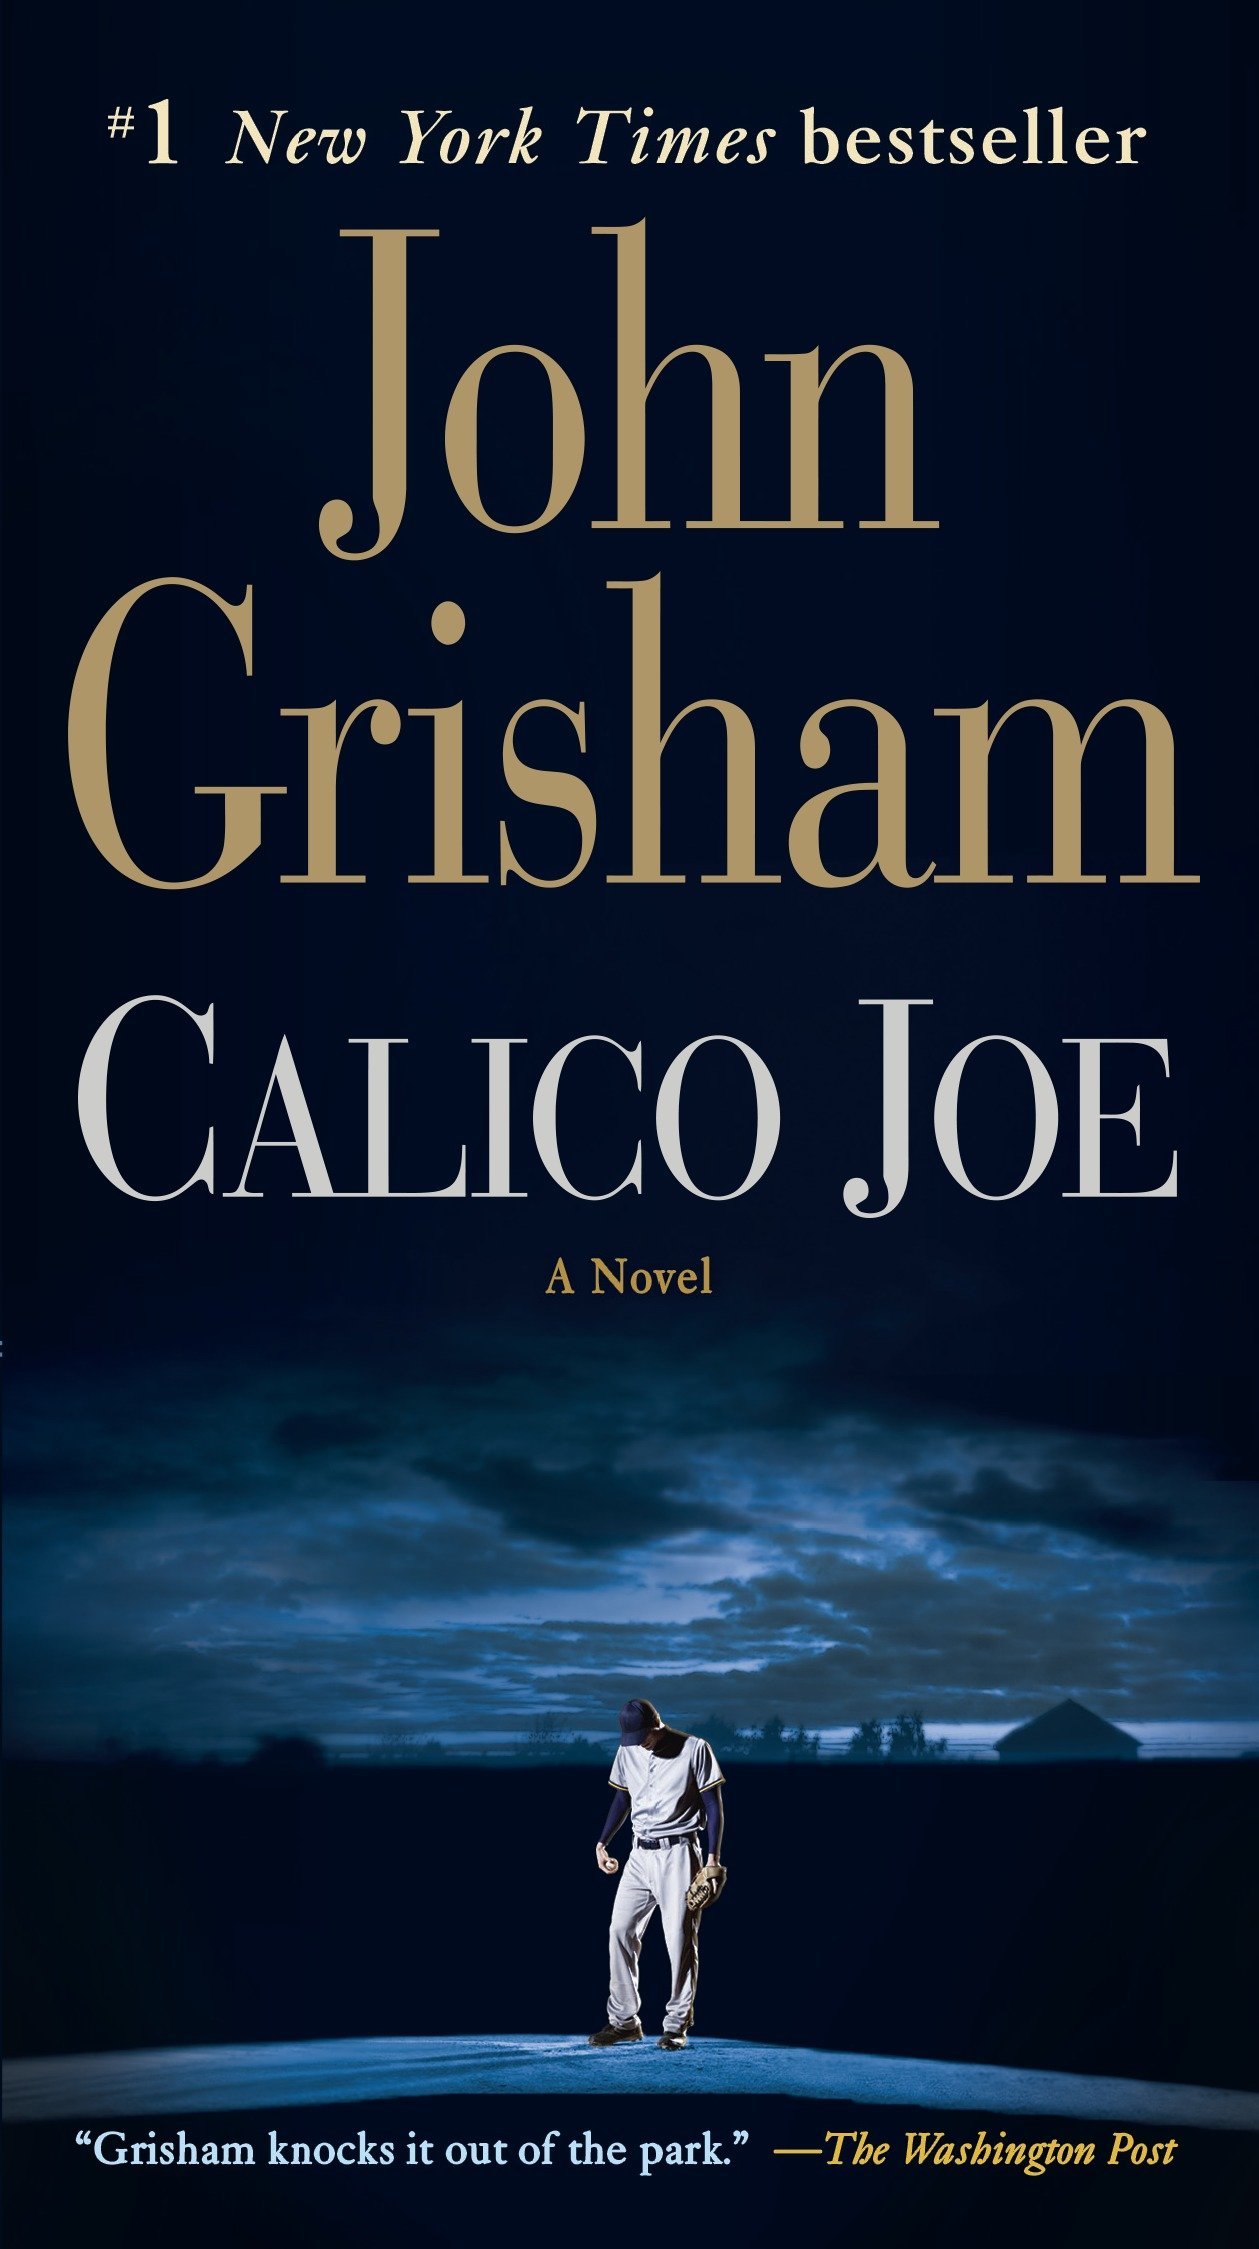 John Grisham’s “Calico Joe” is the 2018 selection for Maroon Edition, MSU’s 10th common reading program. Approximately 5,000 copies of the novel were given to incoming students arriving on campus this fall.